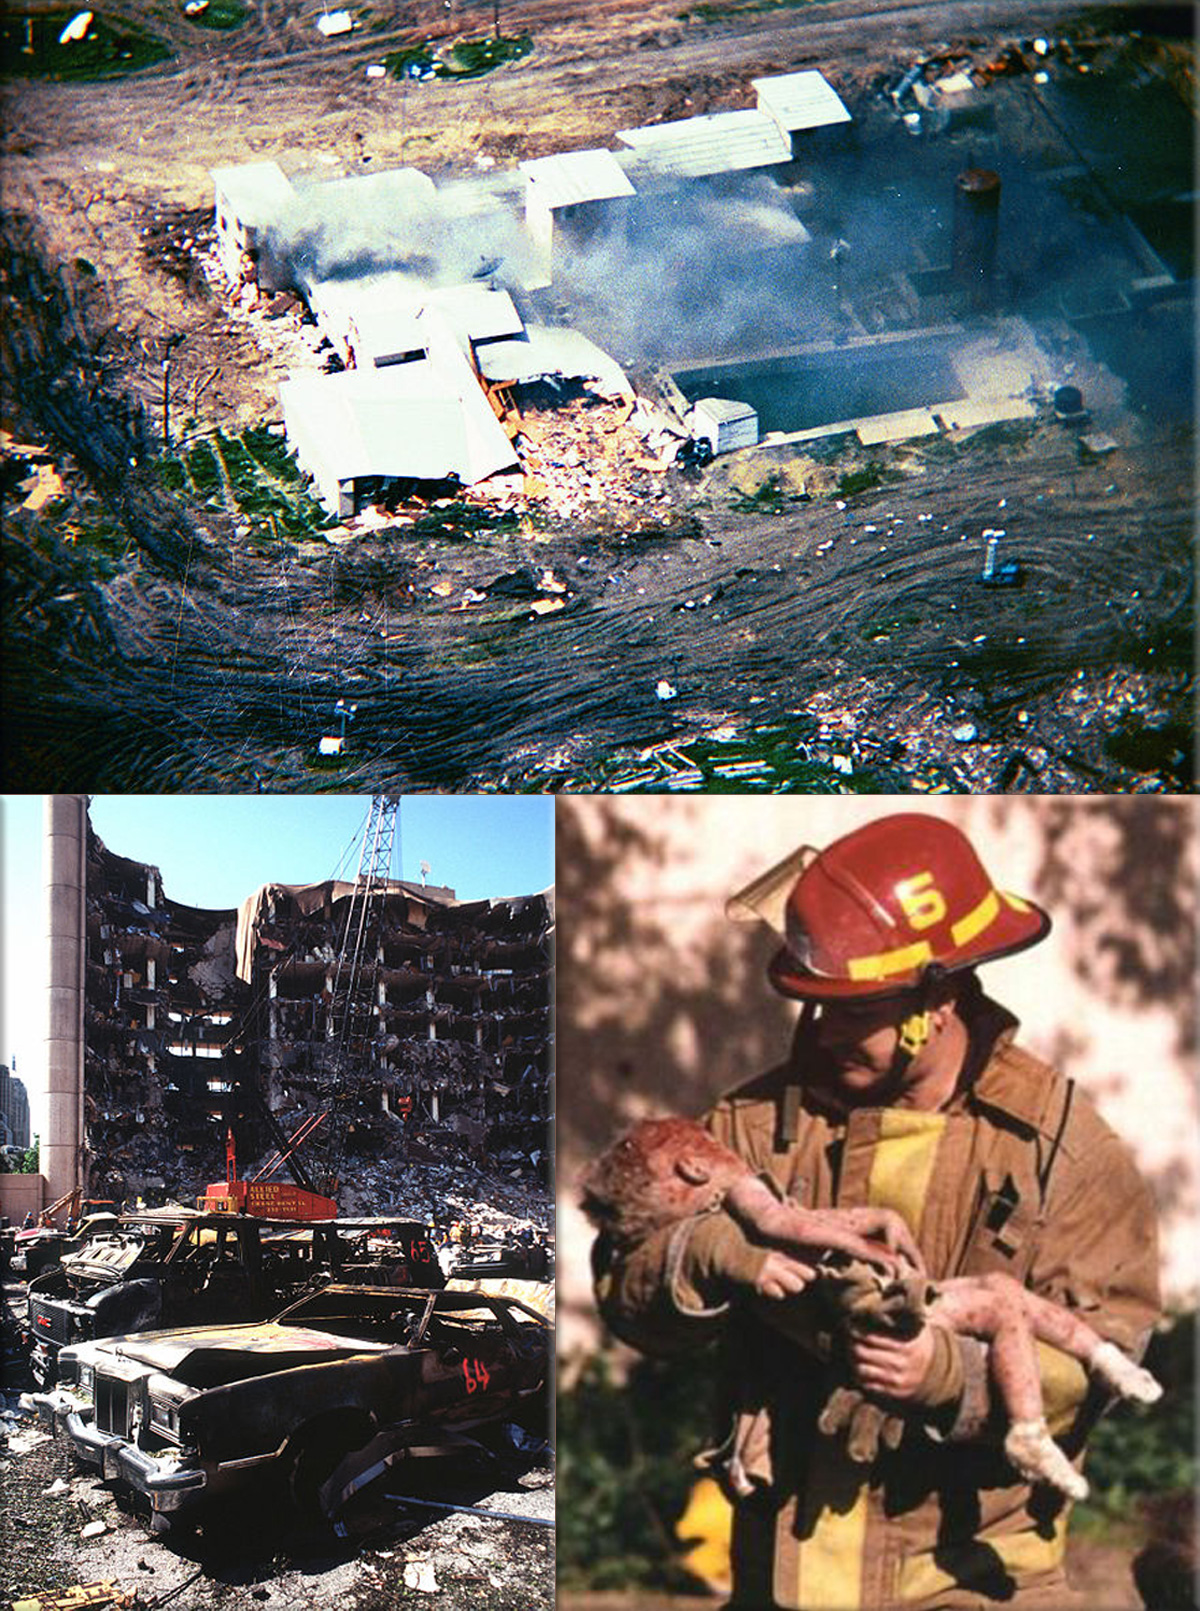 Oklahoma City bombing was a terrorist bomb attack on the Alfred P. Murrah Federal Building in Downtown Oklahoma City on April 19, 1995